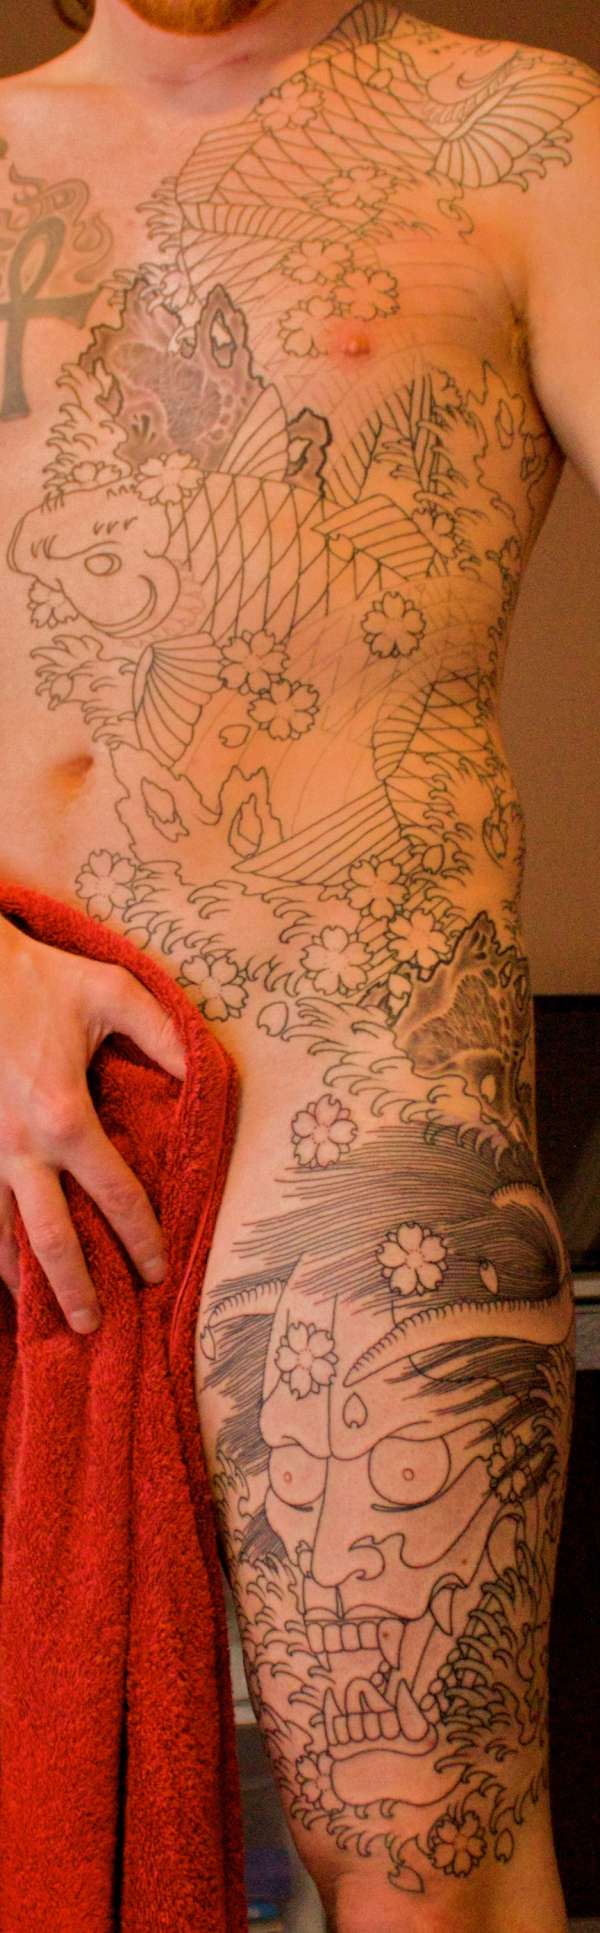 Koi fish side panel - Extended tattoo